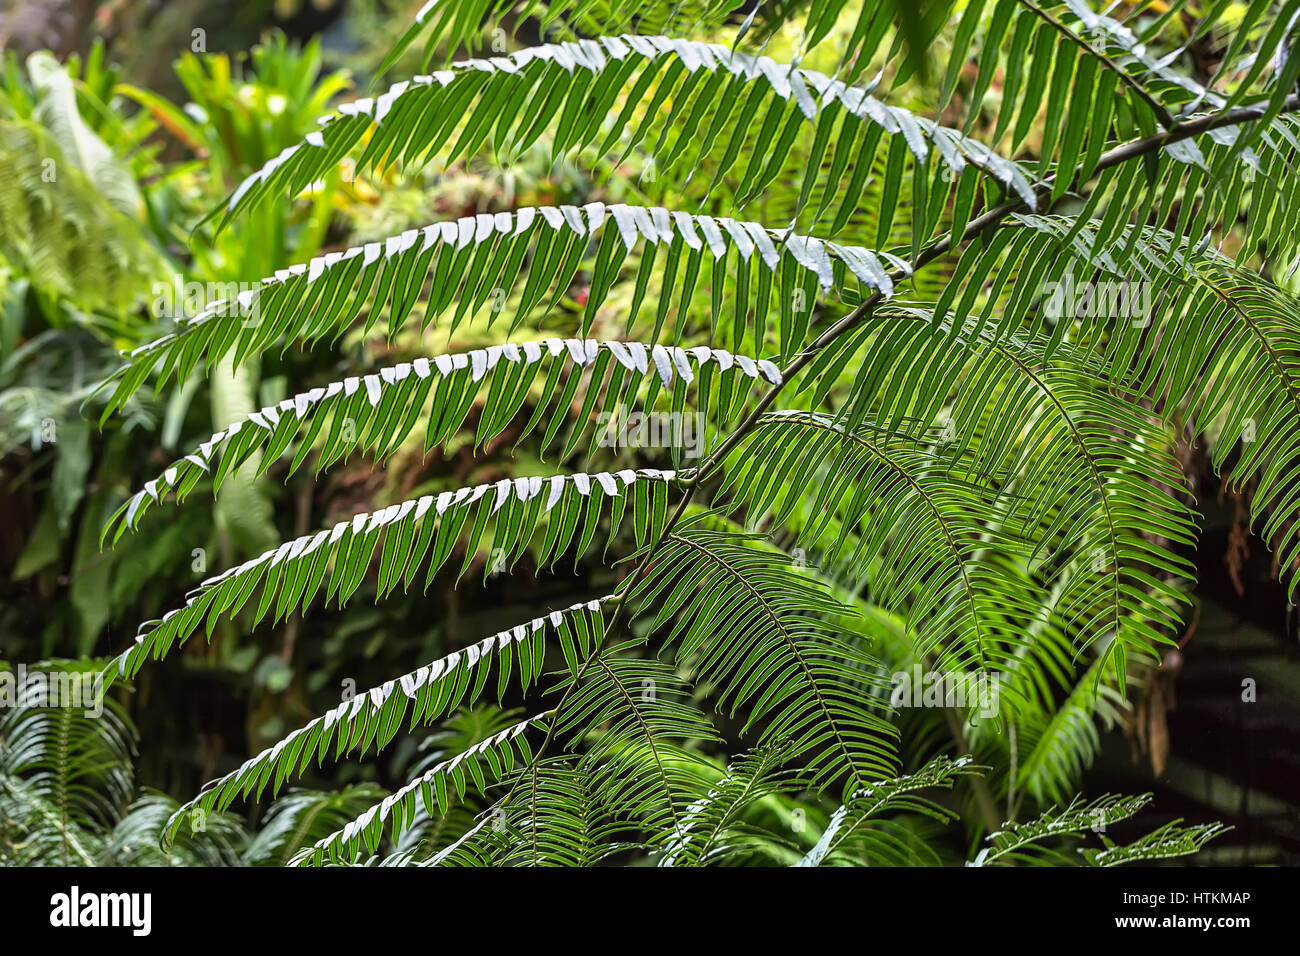 Green leaves of the fern on the blurry background of the plants. It is the Cloud Forest in Singapore. Closeup. Horizontal. Stock Photo